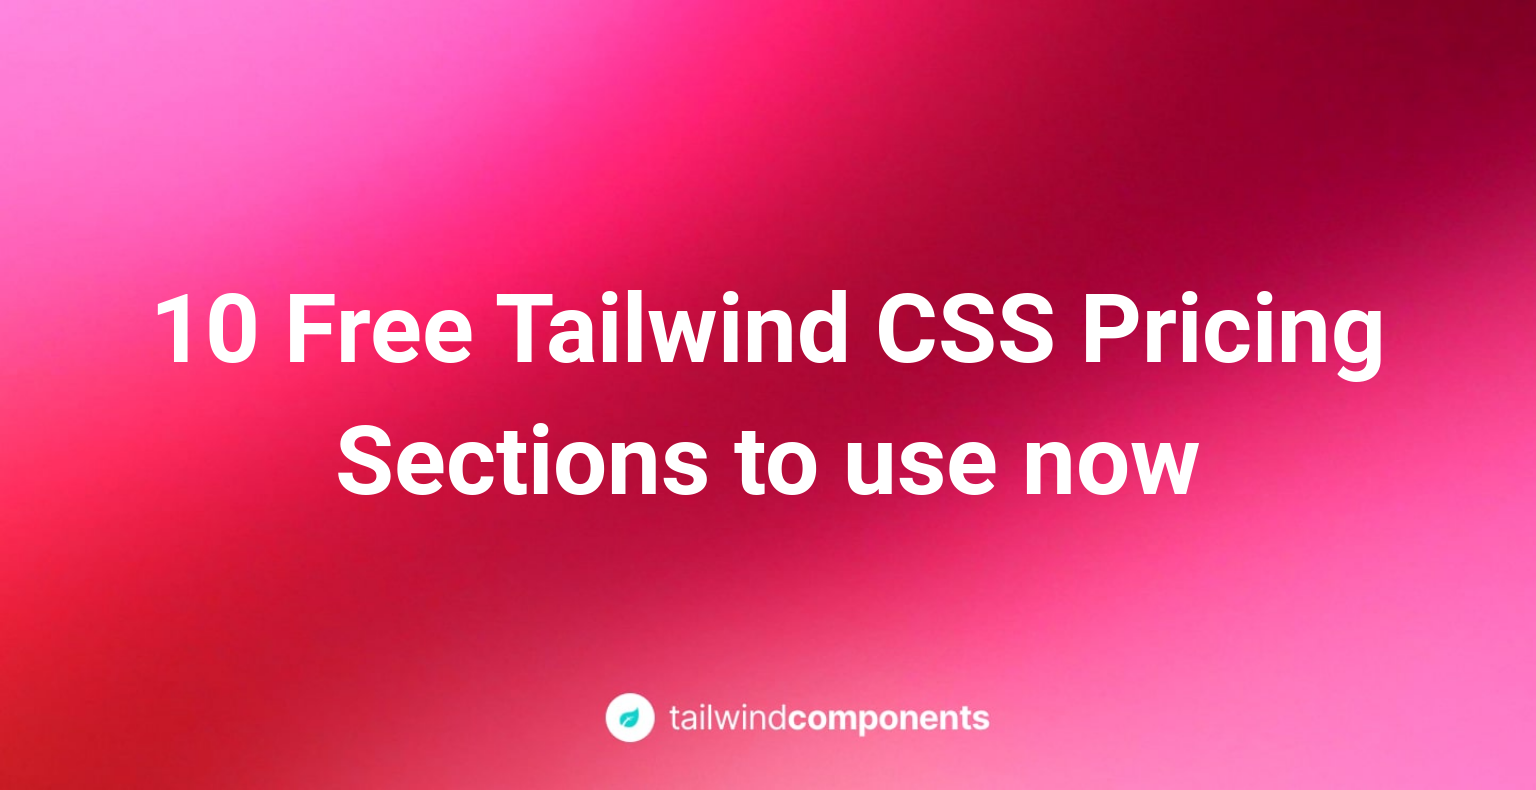 10 Free Tailwind CSS Pricing Sections to use now